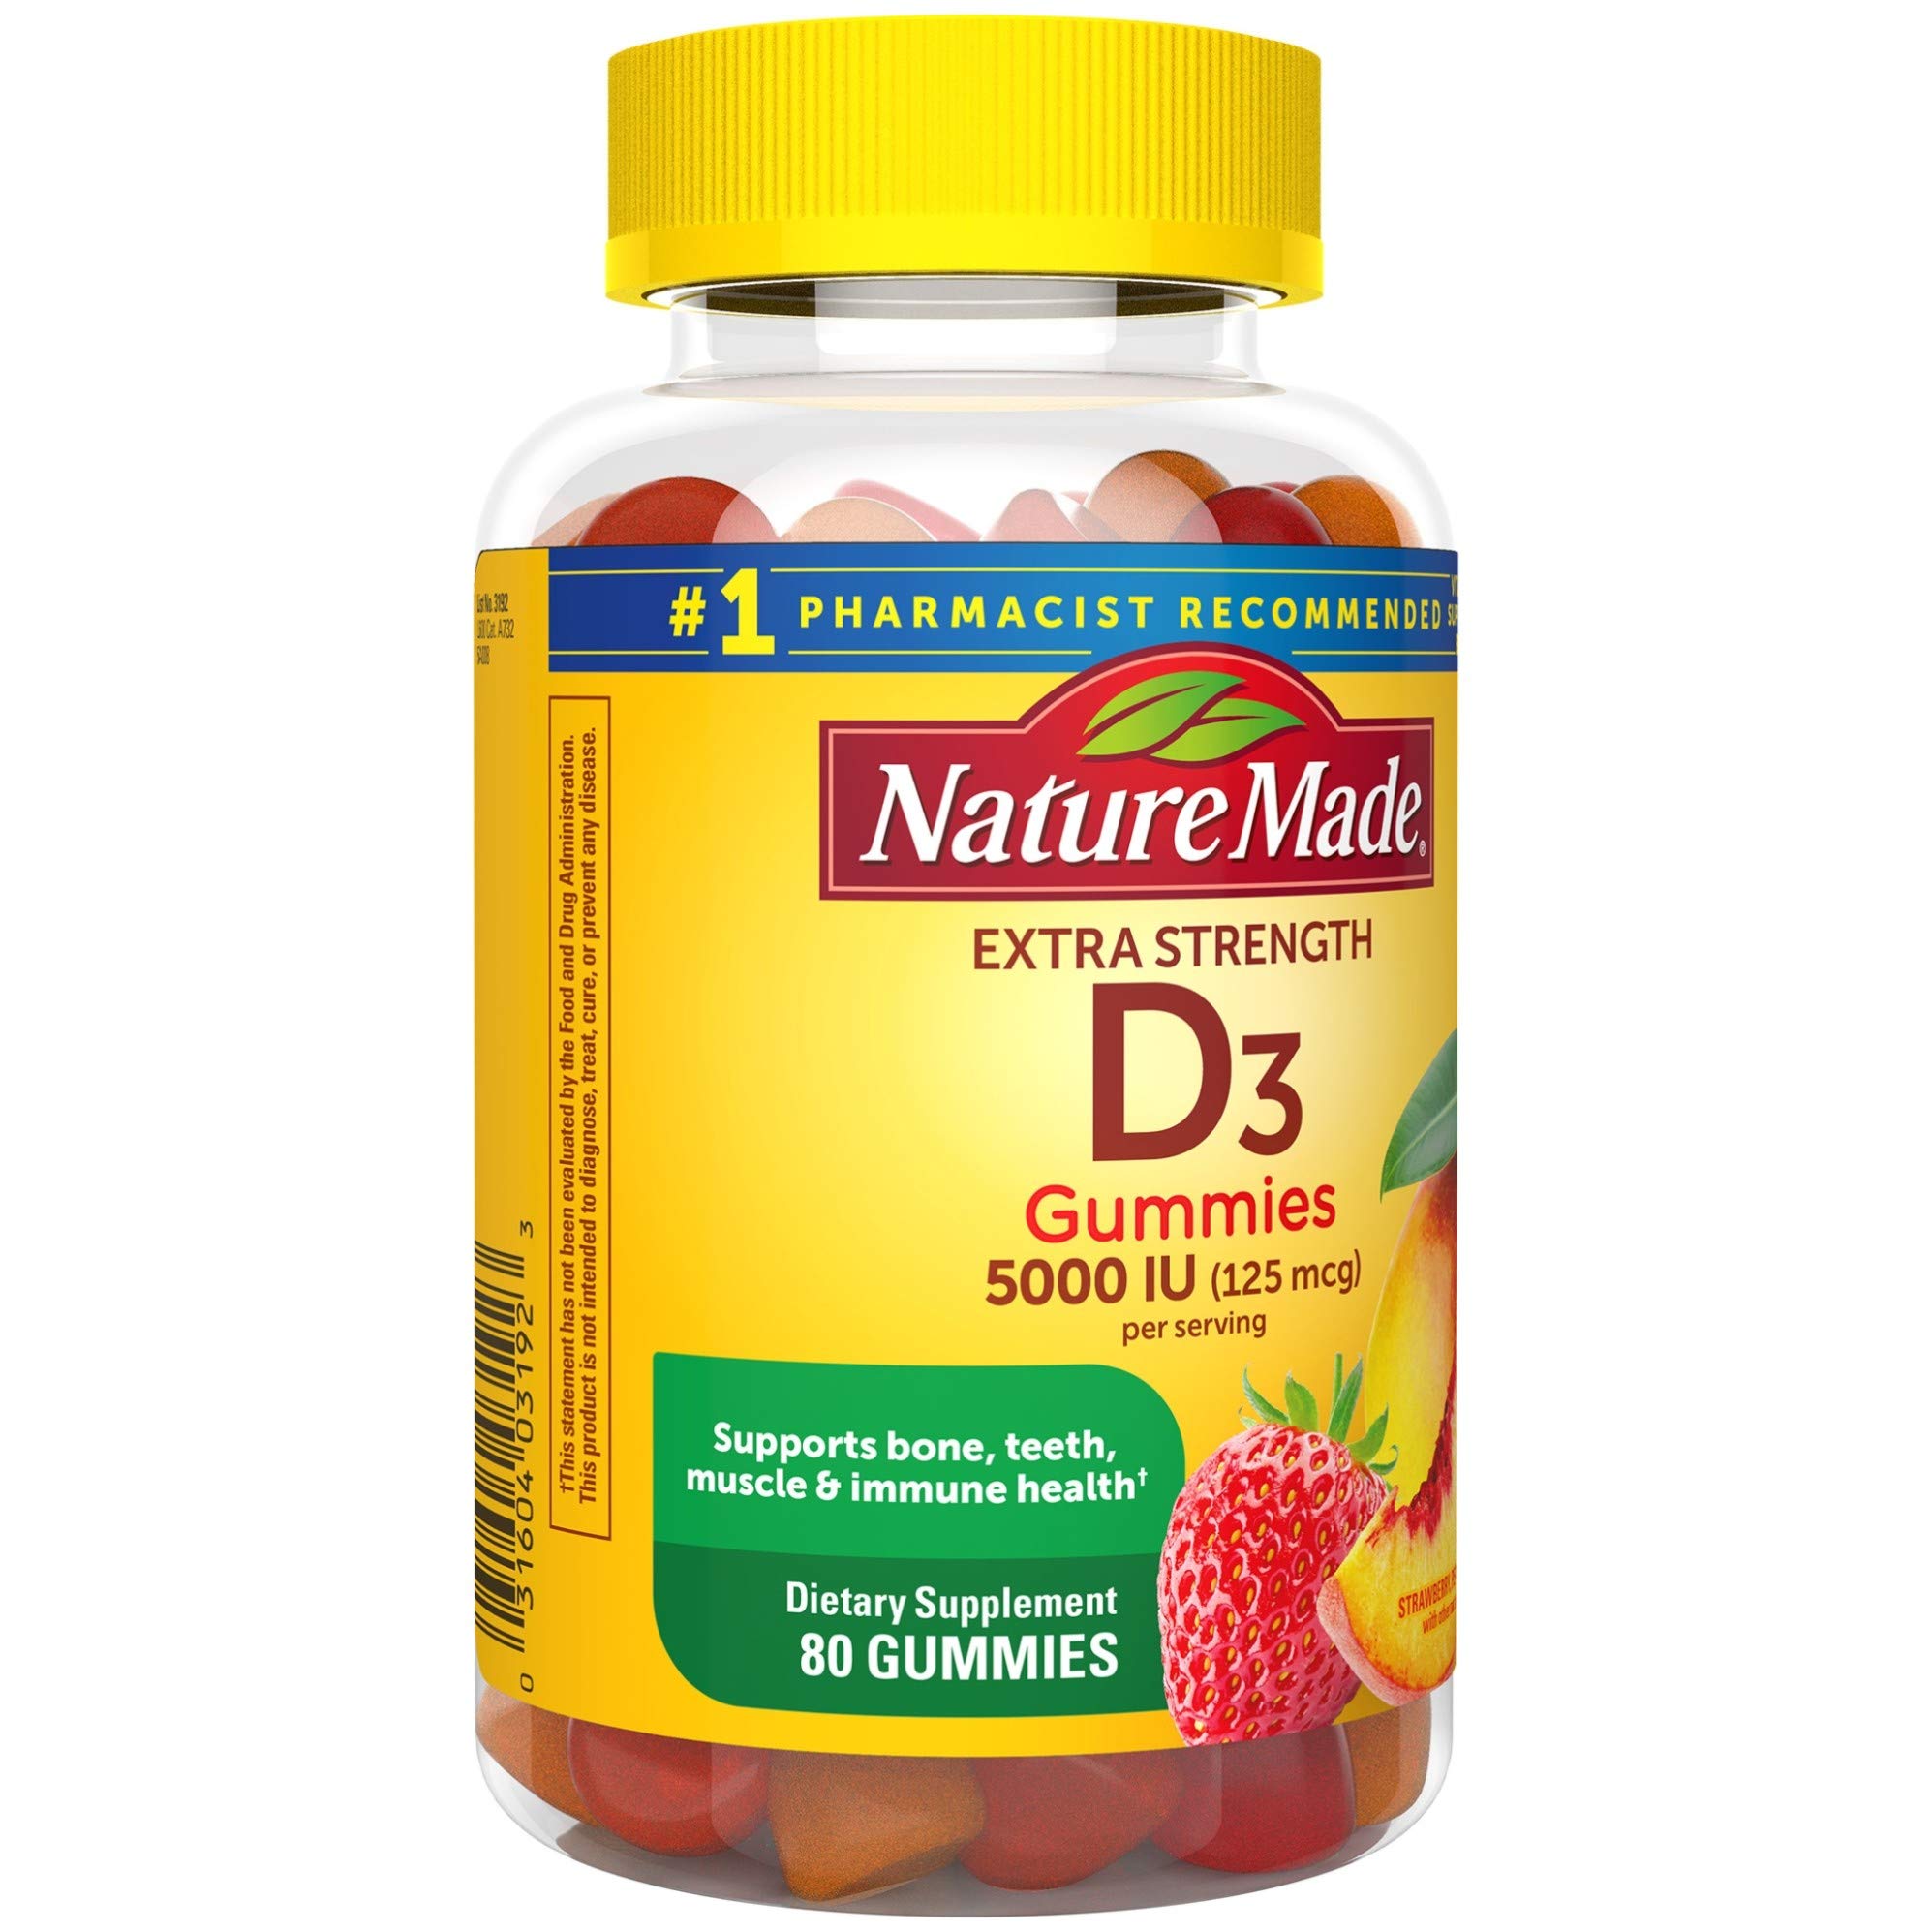 Nature Made Extra Strength Vitamin D3 5000 IU (125 mcg) per serving, Dietary Supplement for Bone, Teeth, Muscle and Immune Health Support, 80 Gummies, 40 Day Supply, 80 Count (Pack of 1)